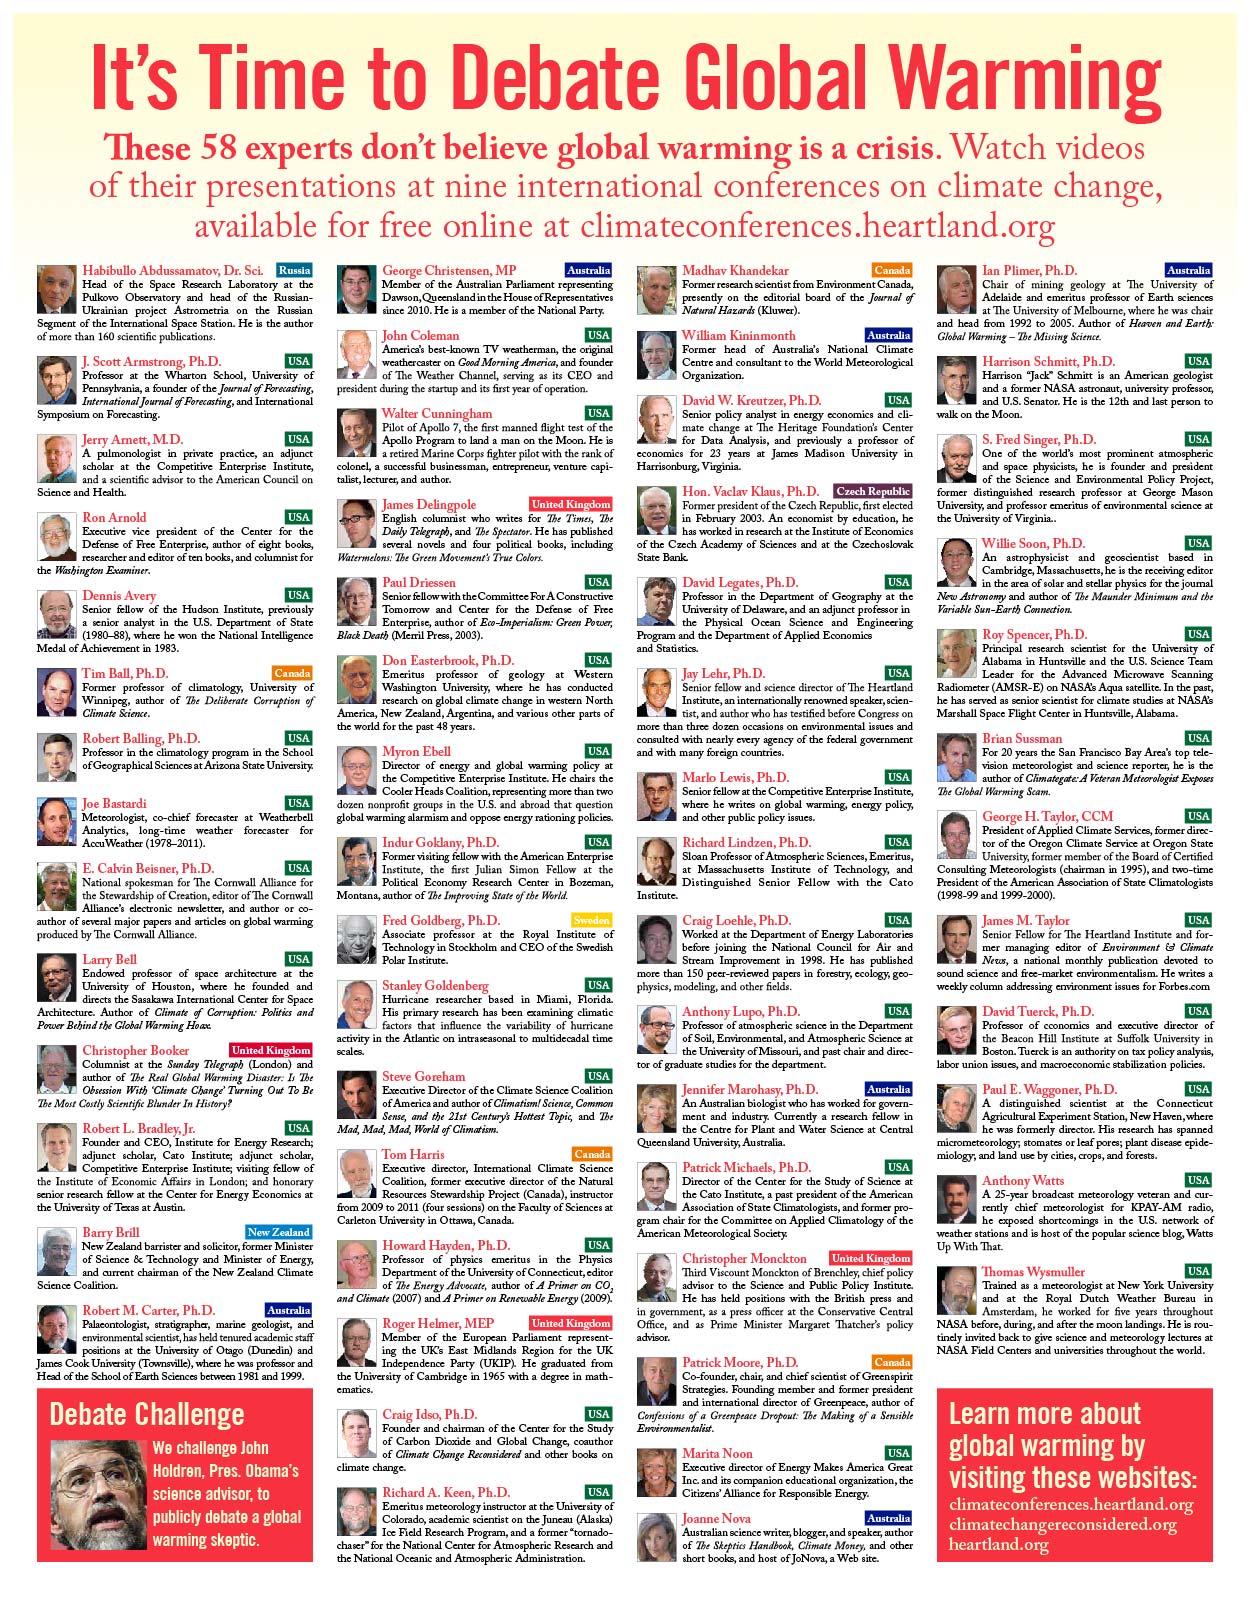 Heartland Institute 58 Experts Poster Remixed by DeSmog - DeSmog